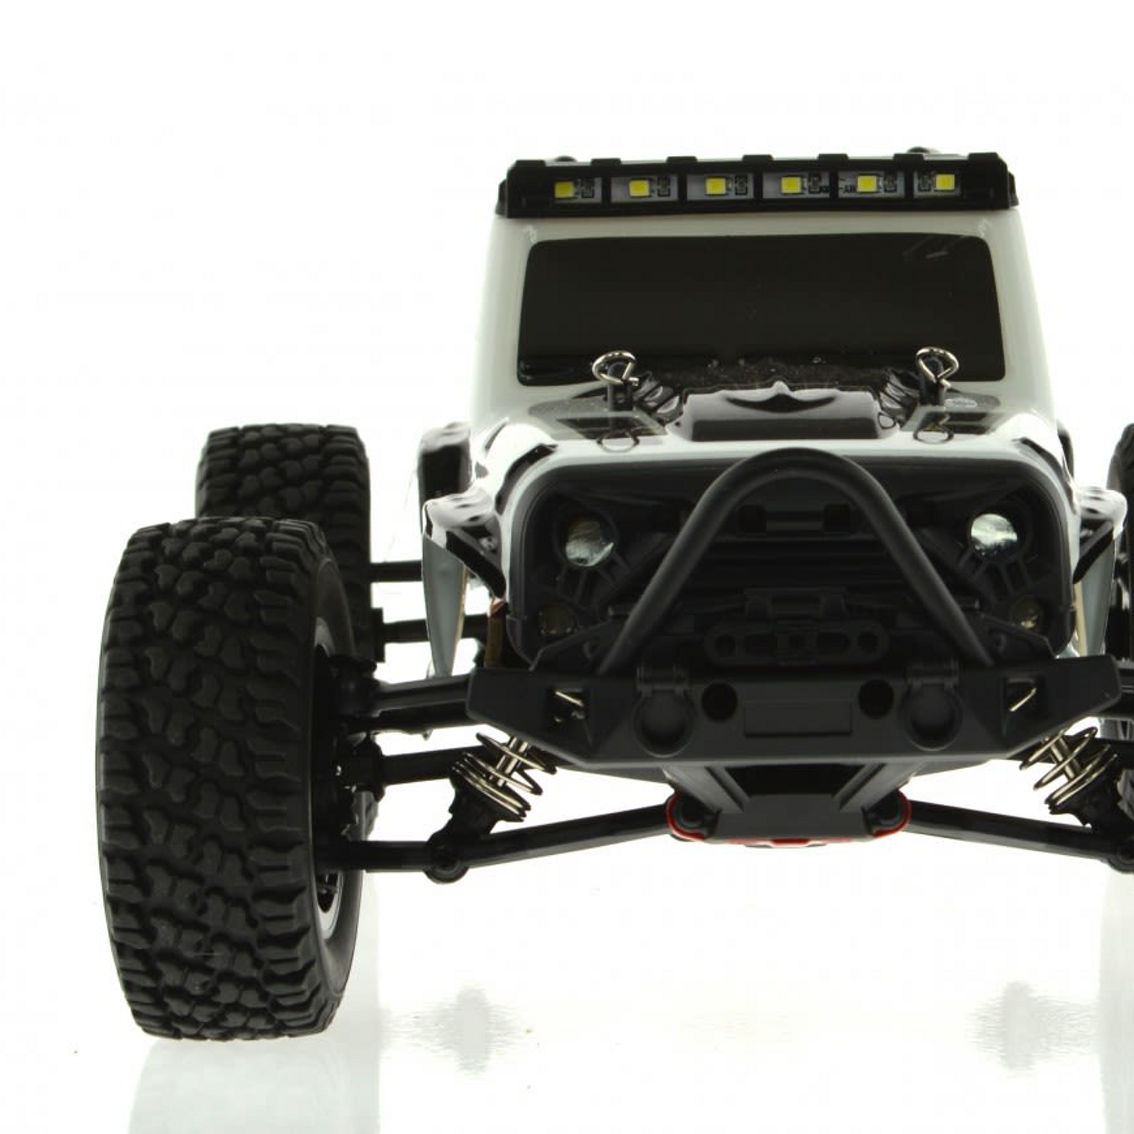 CIS-16103-W 1:16 scale Jeep with head and search lights 30 MPH 2.4 GHz remote - Image 4 of 5